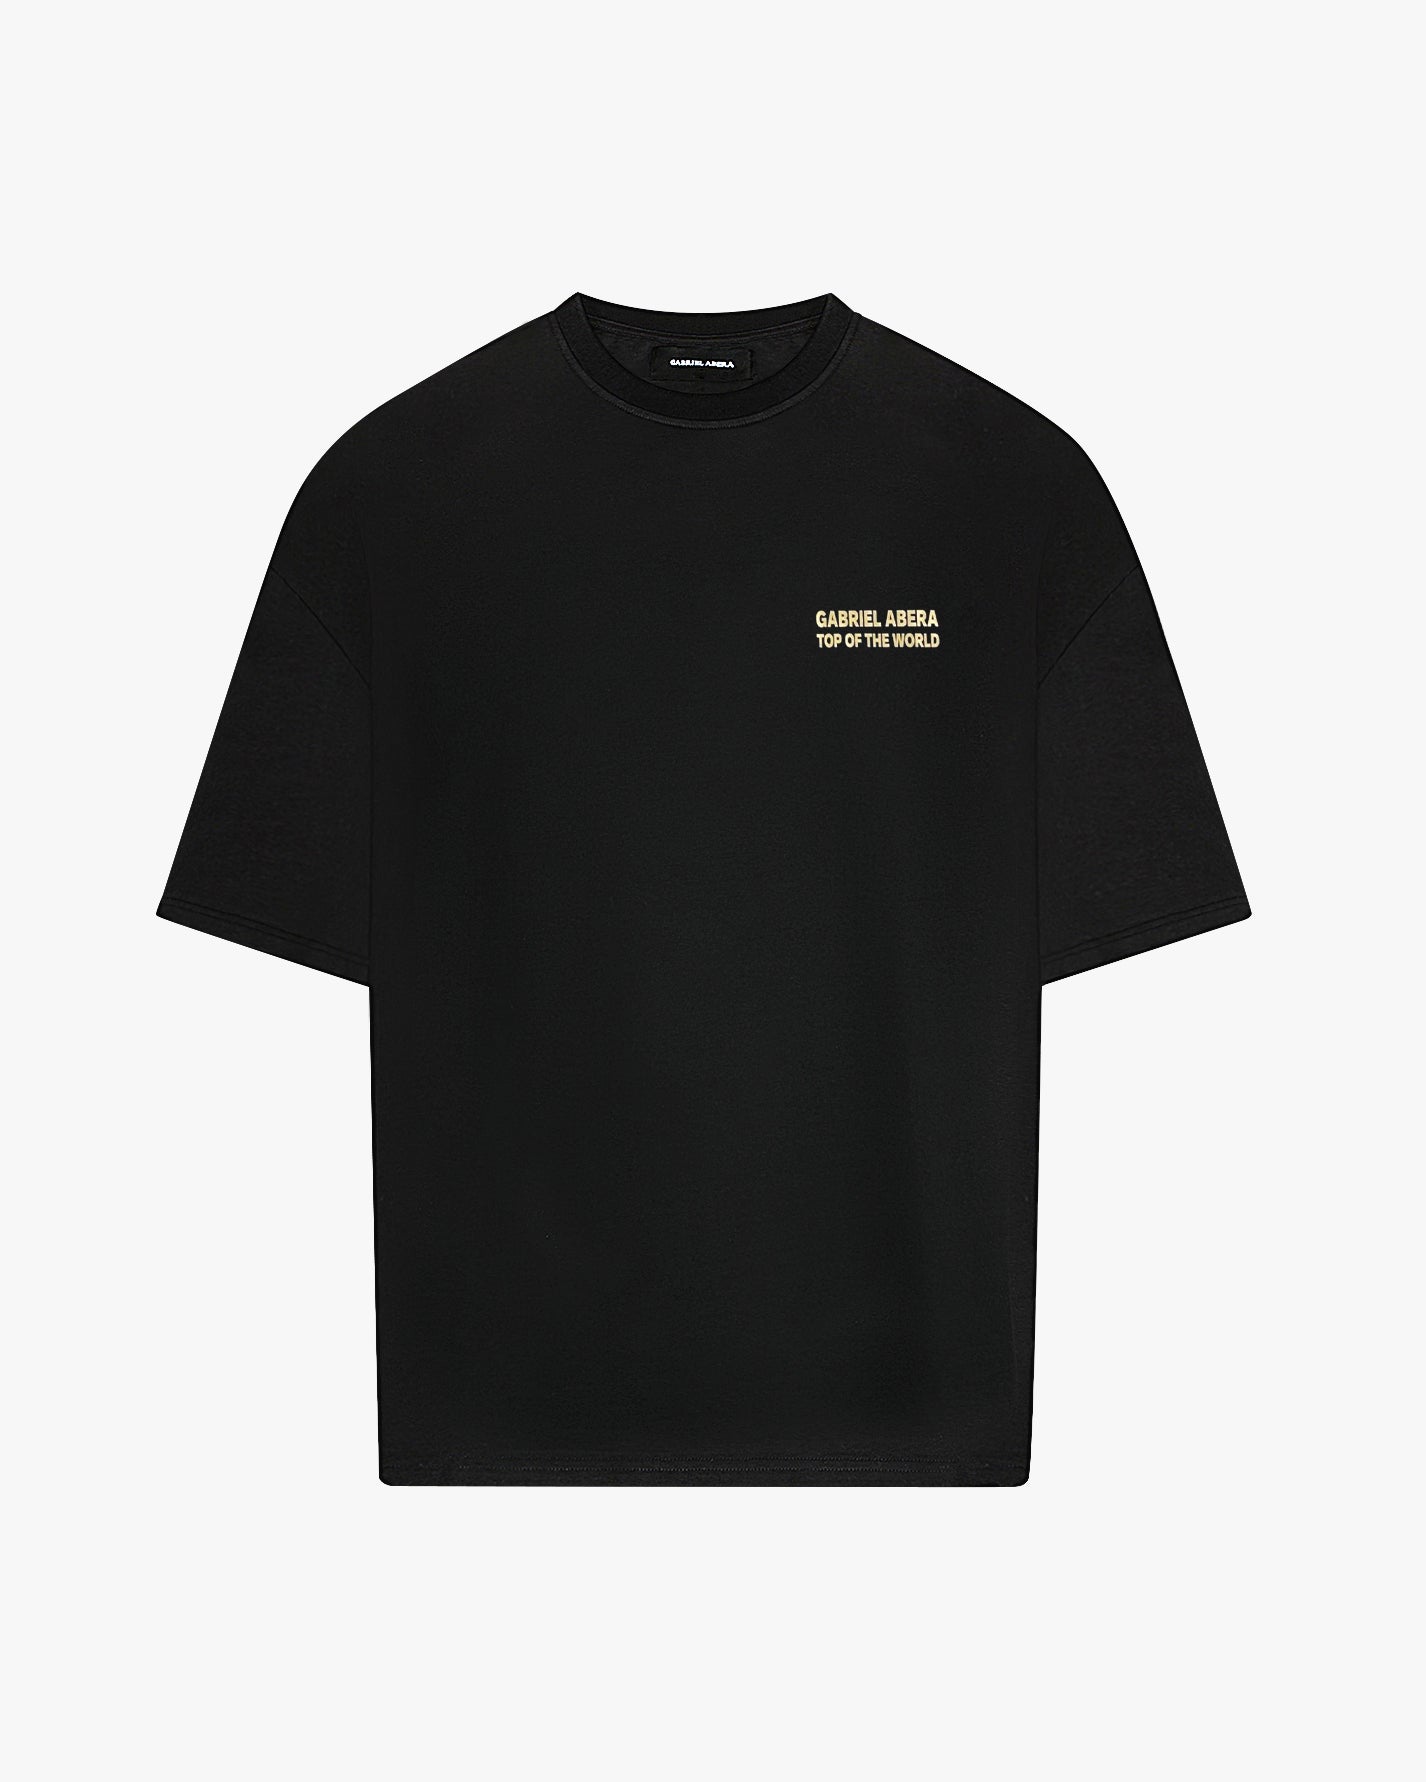 TOP OF THE WORLD BASIC T-SHIRT - BLACK/GOLD